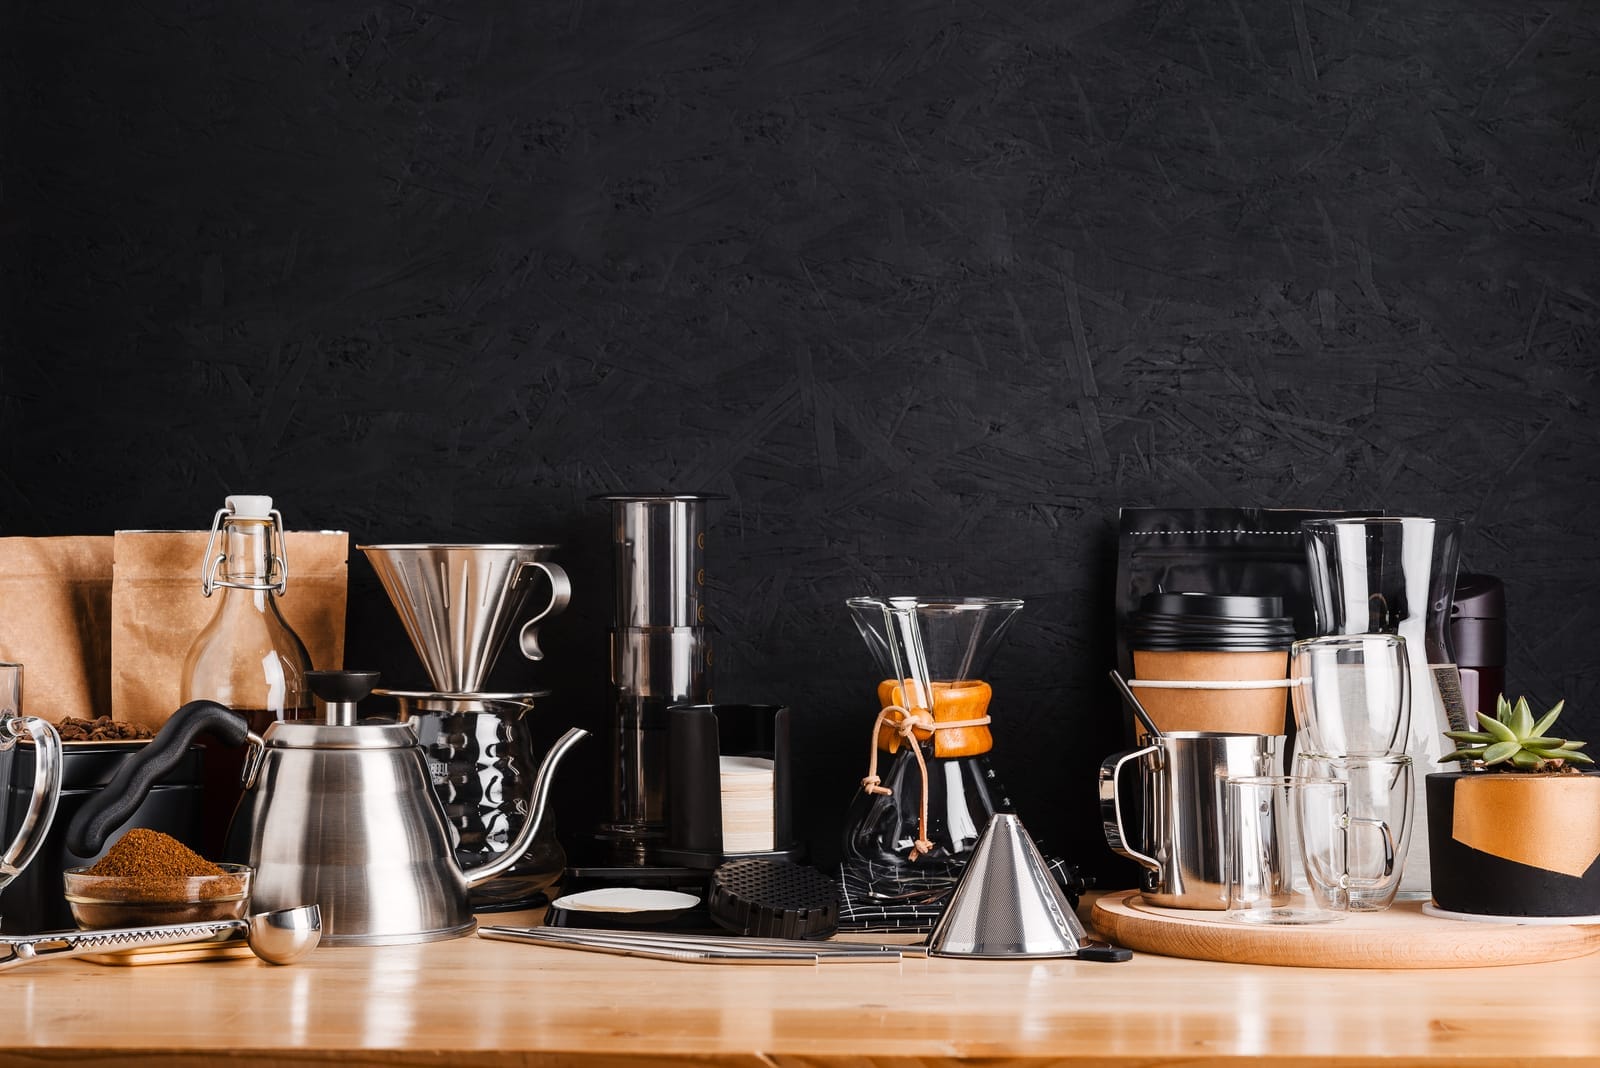 Coffee brewing equipment found in coffee shops and restaurants.